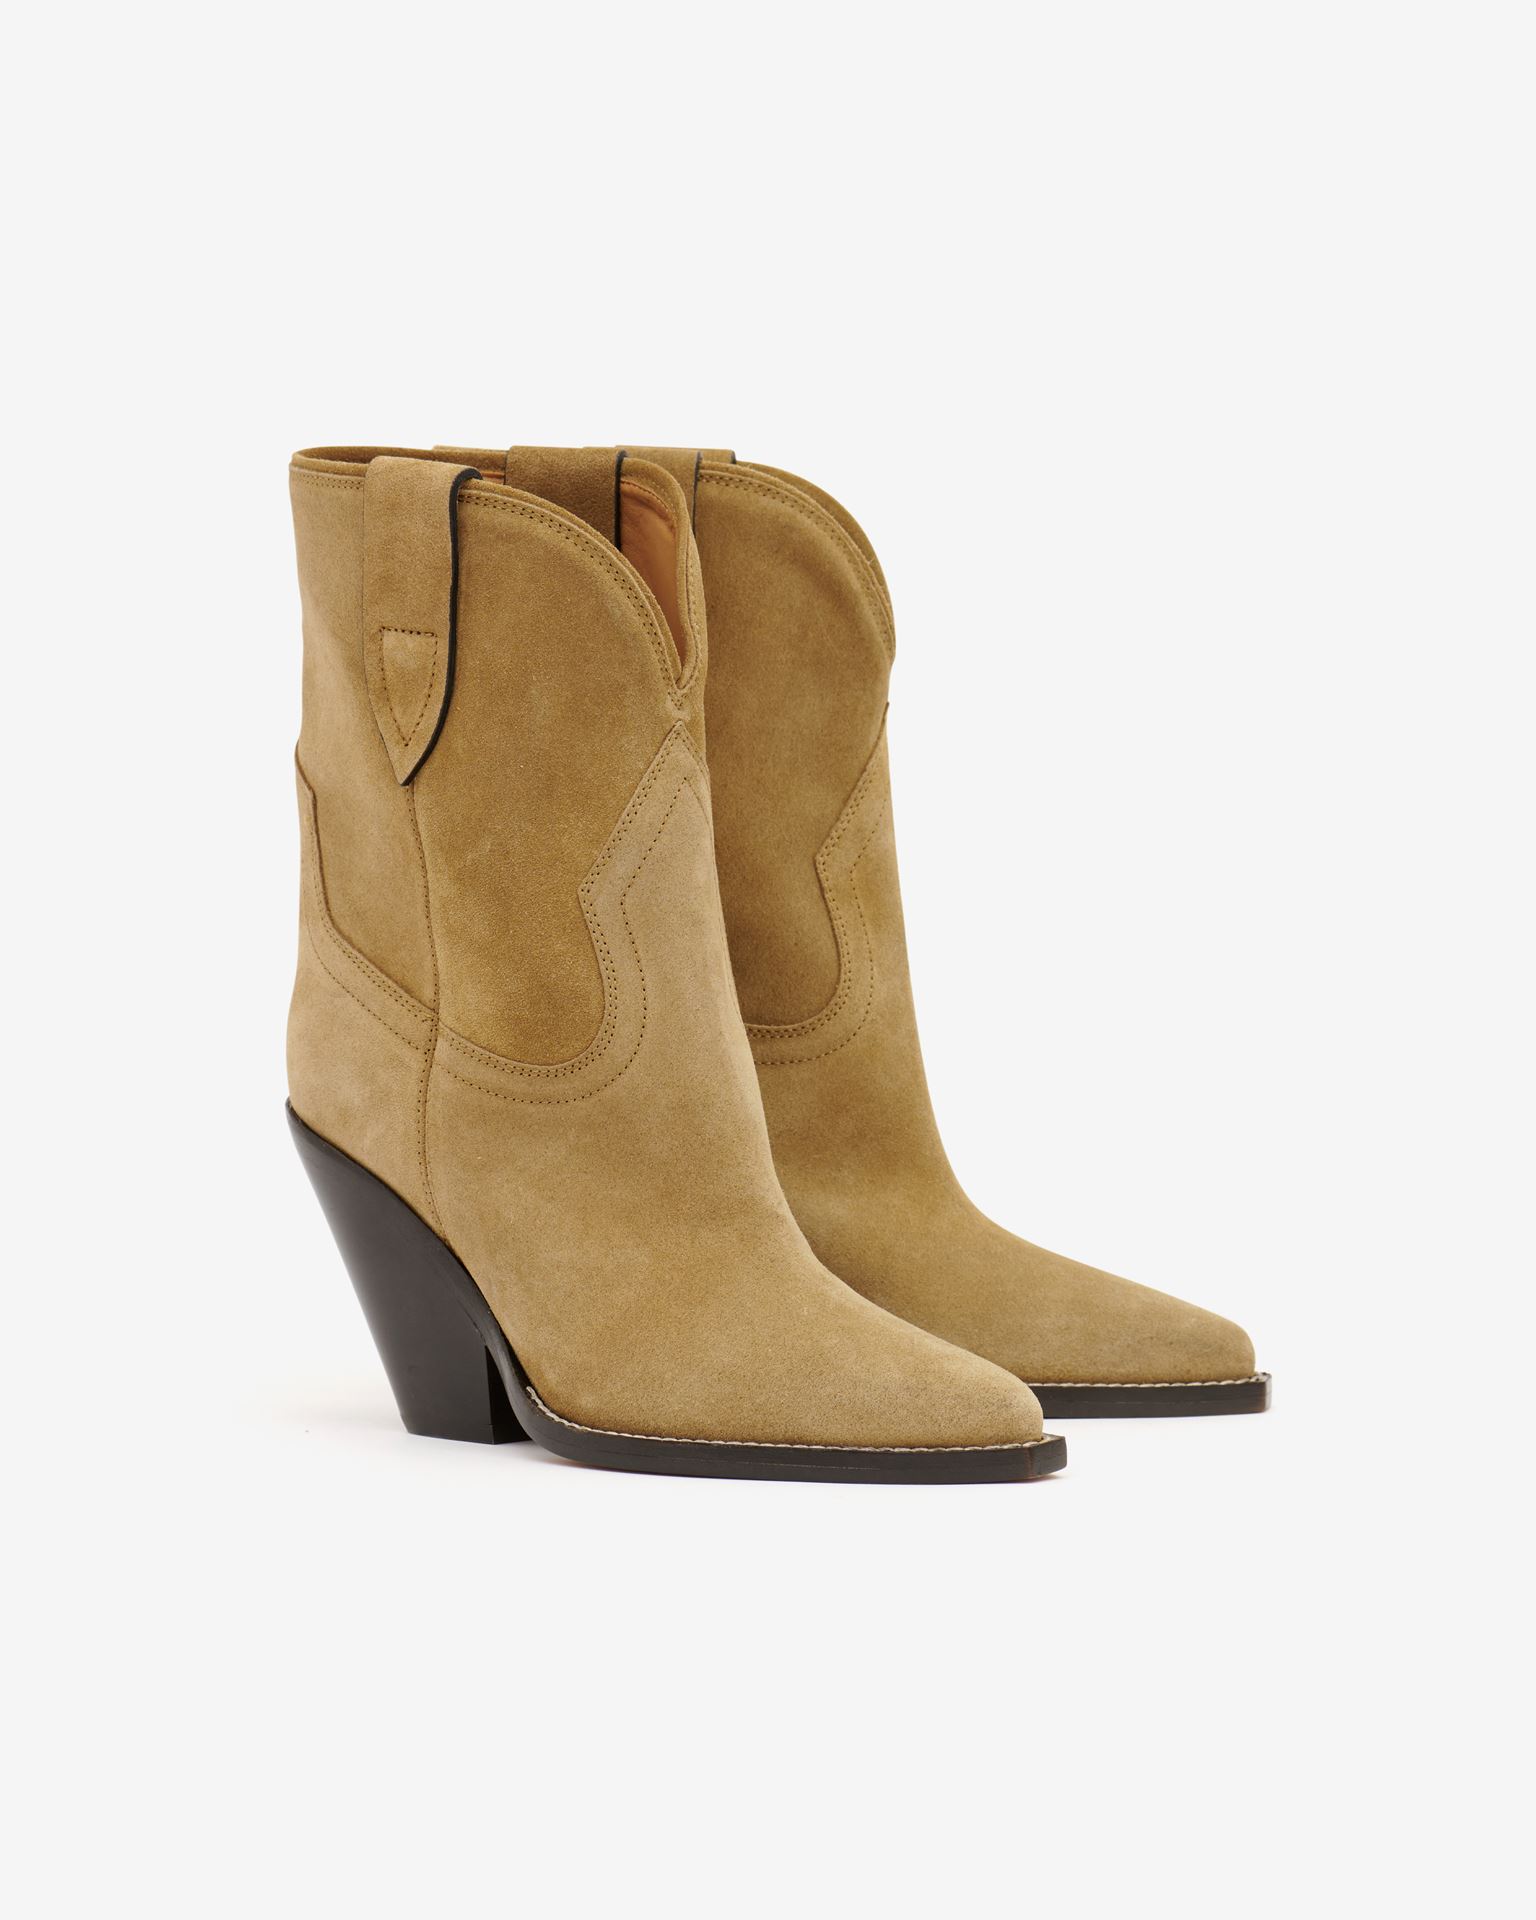 Isabel Marant, Leyane Calf Suede Leather Low Boots - Women - Brown